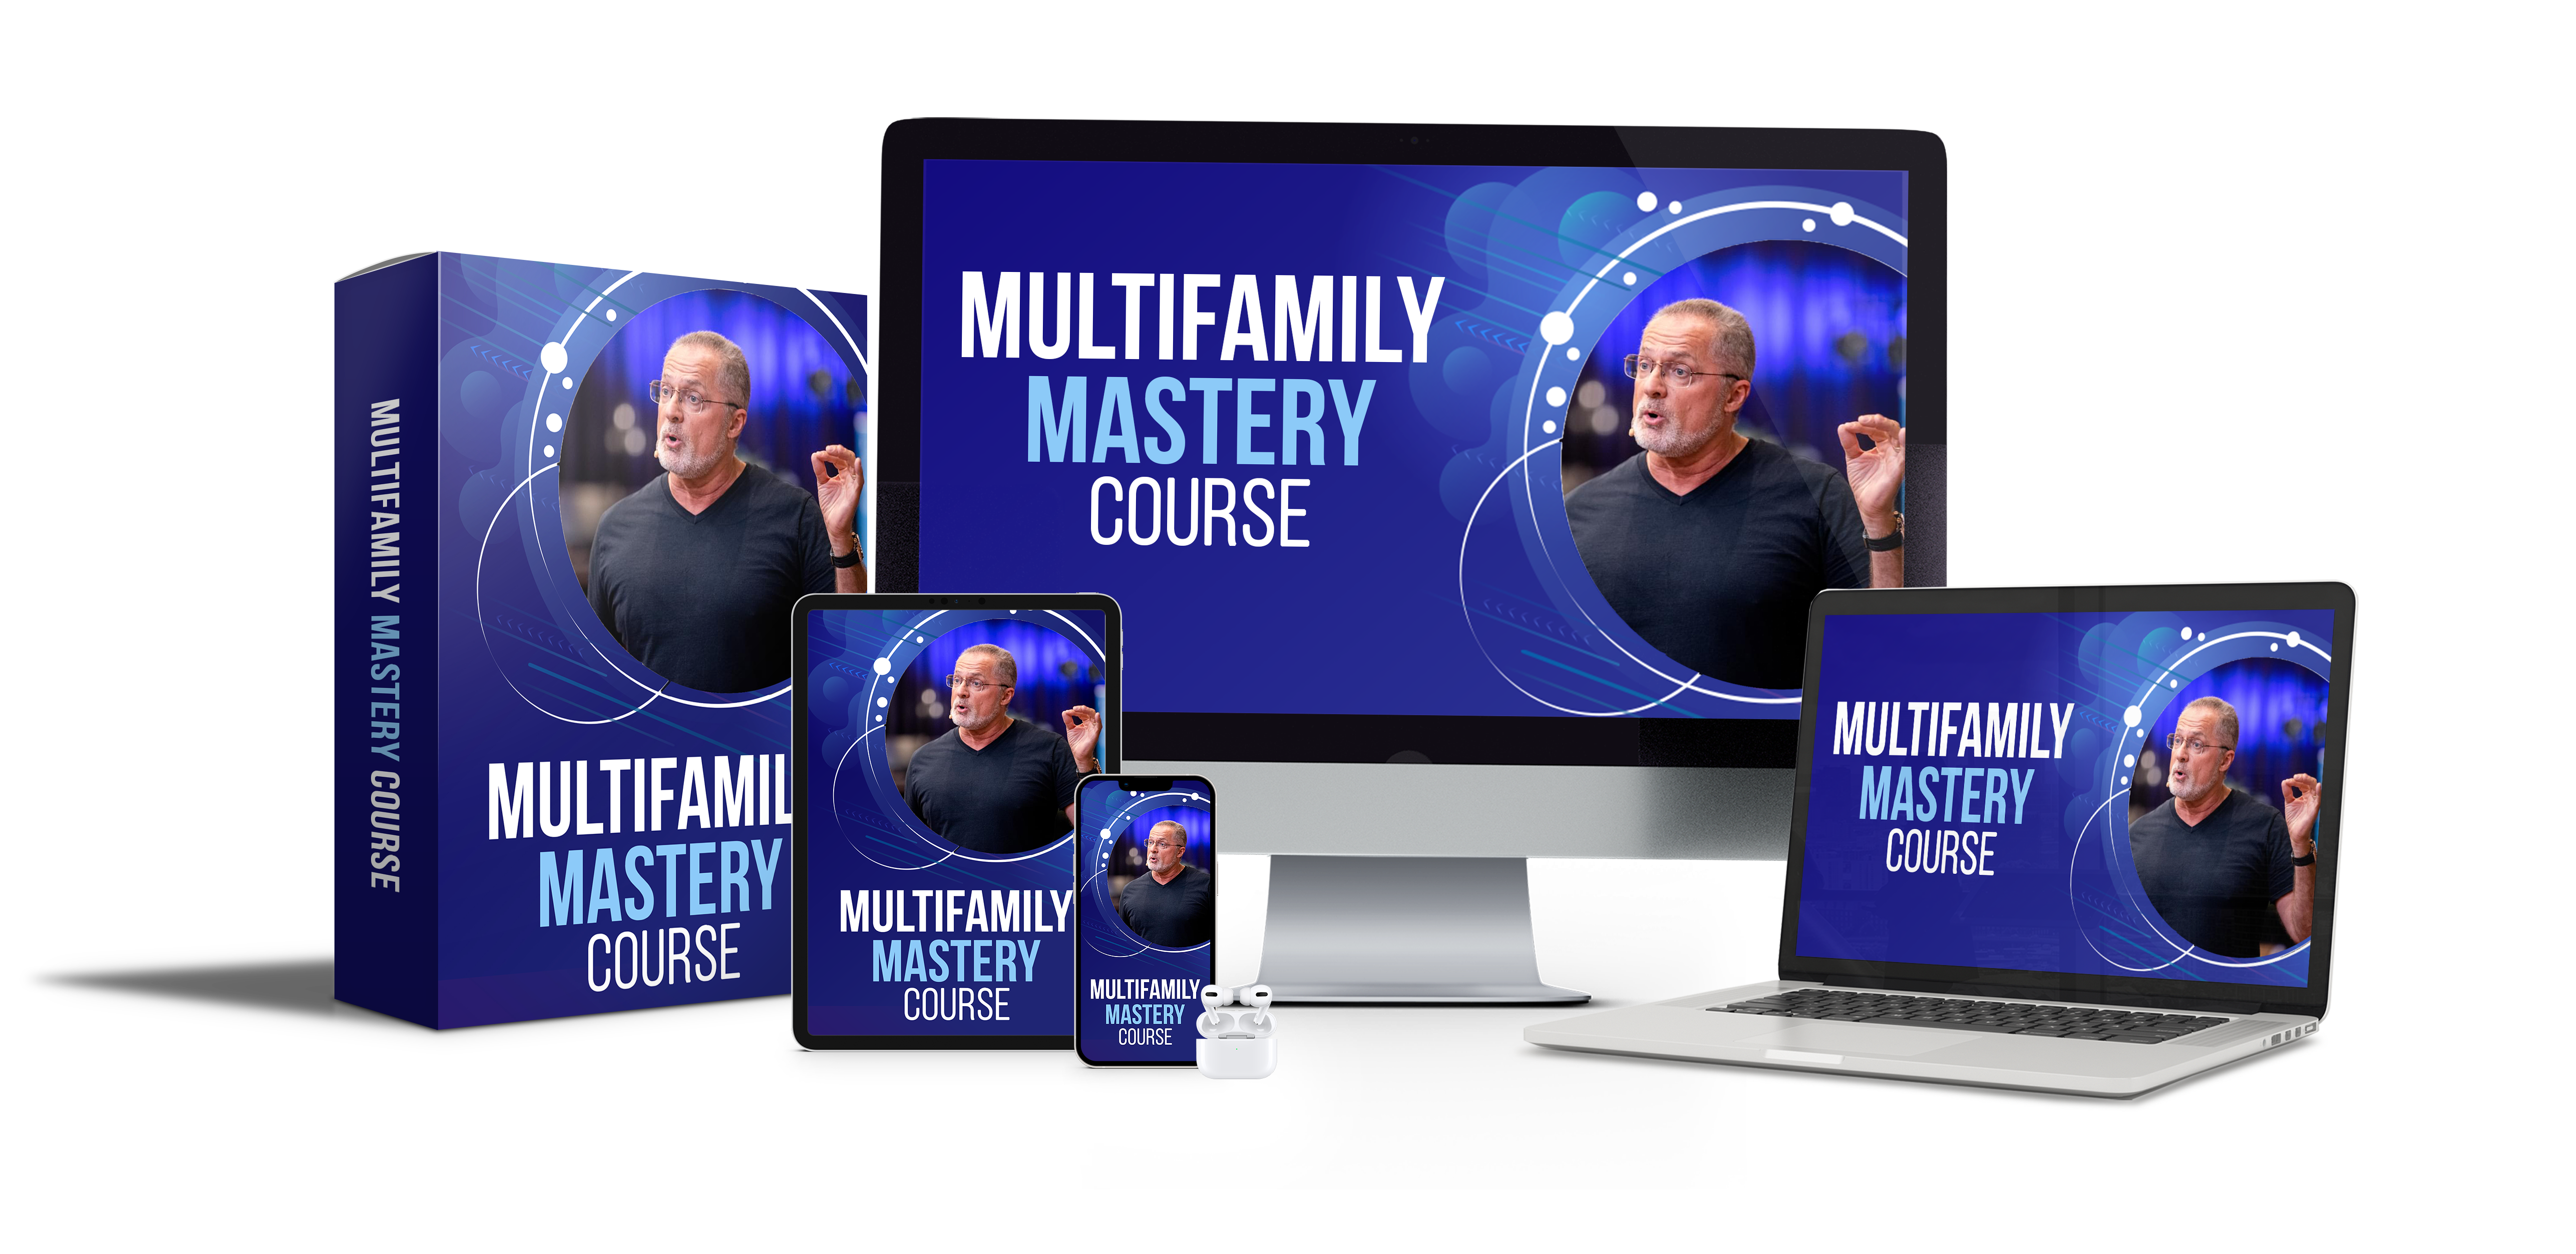 Multifamily Mastery Course By Rod Khleif - Free Download Course